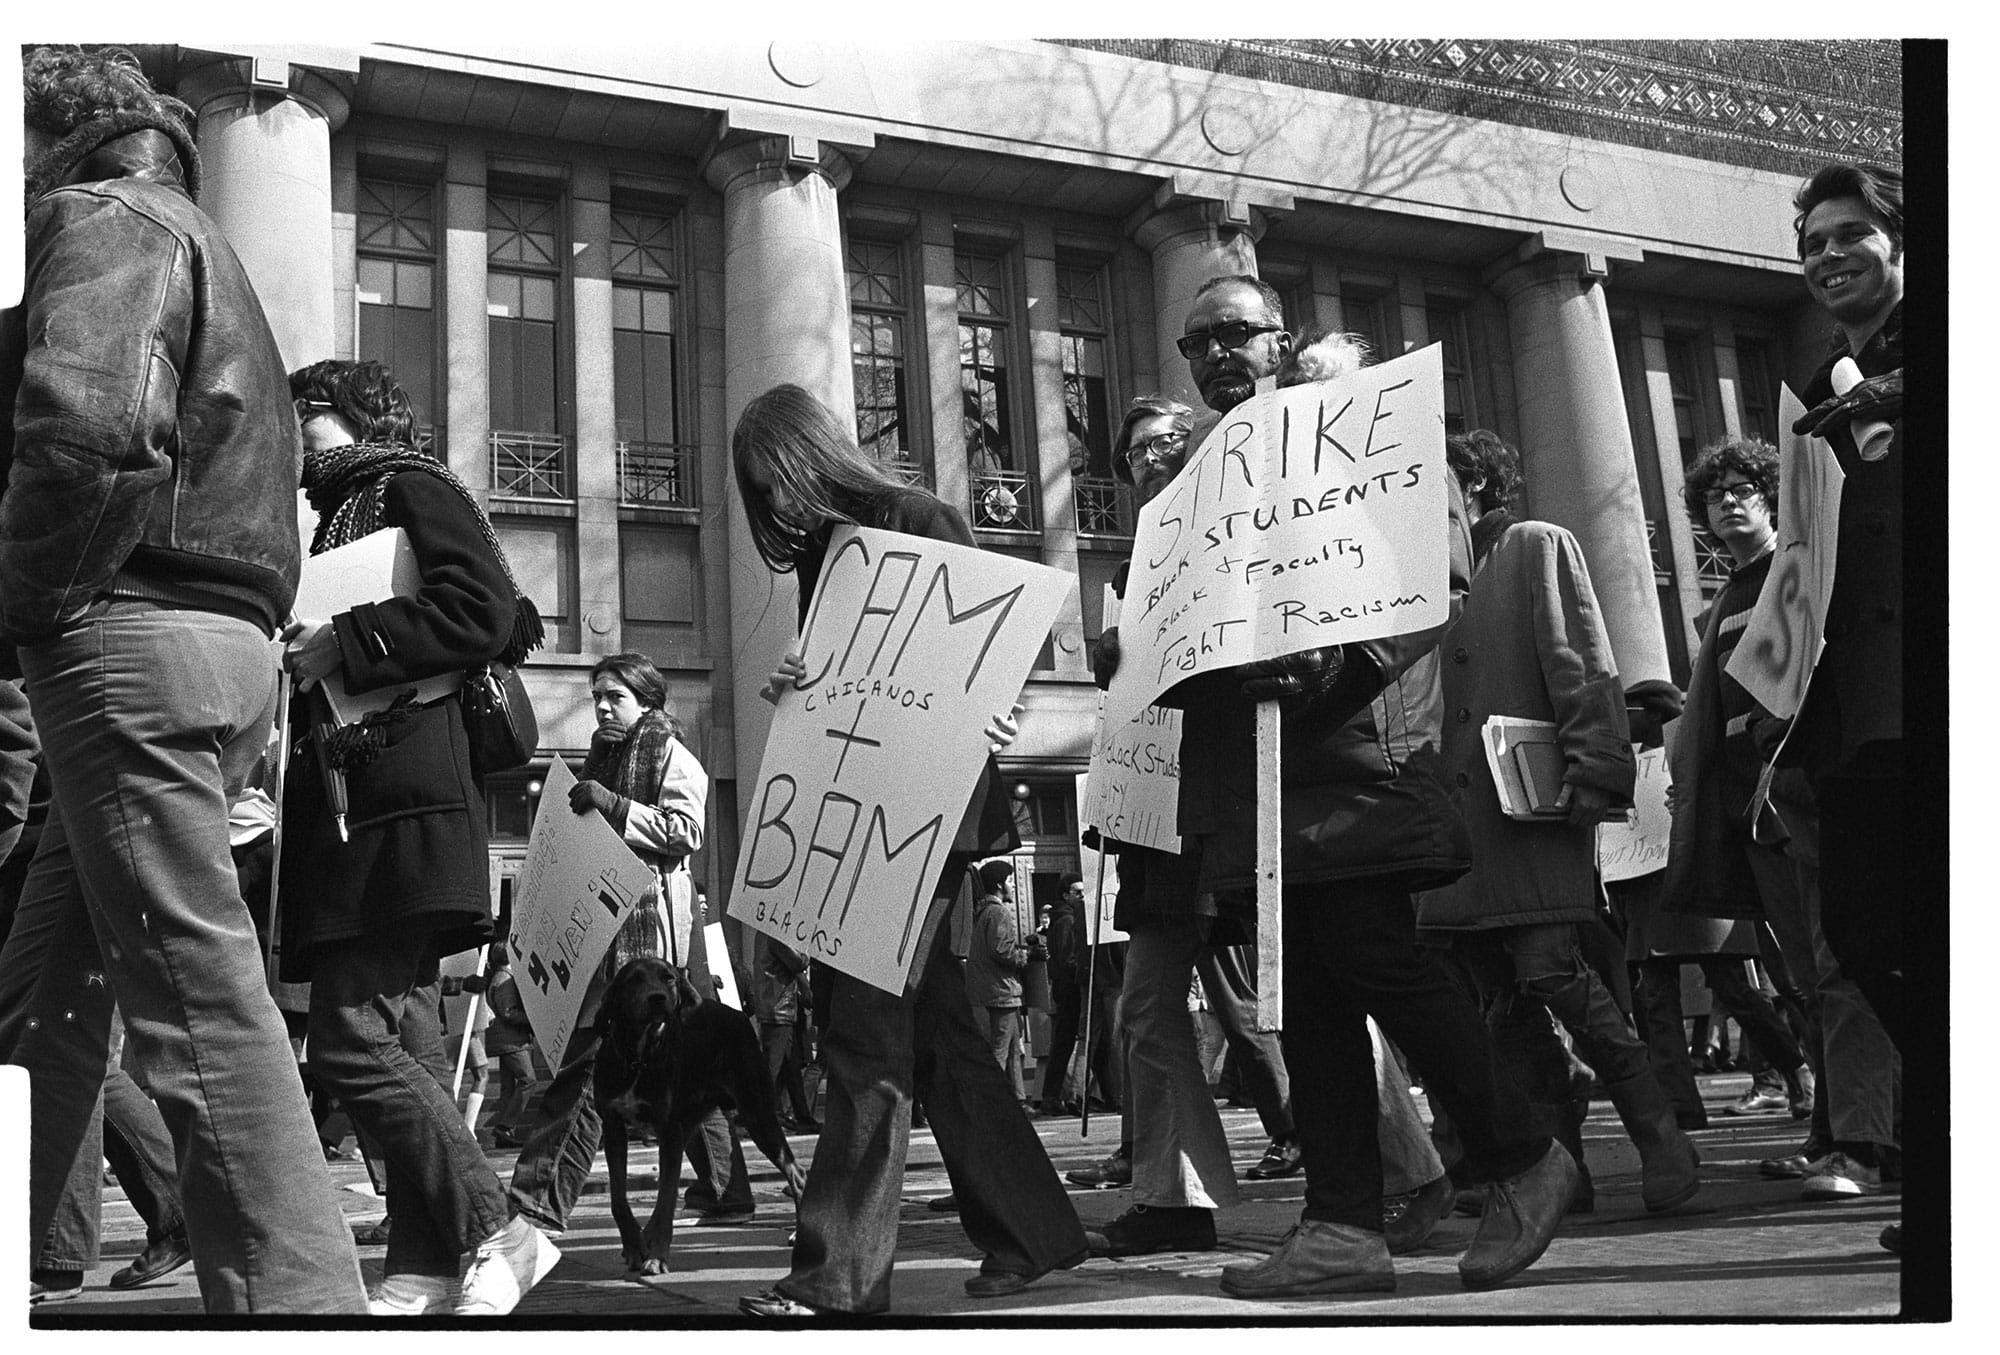 Picketers carry signs outside of Hill Auditorium at a Black Action Movement demonstration.